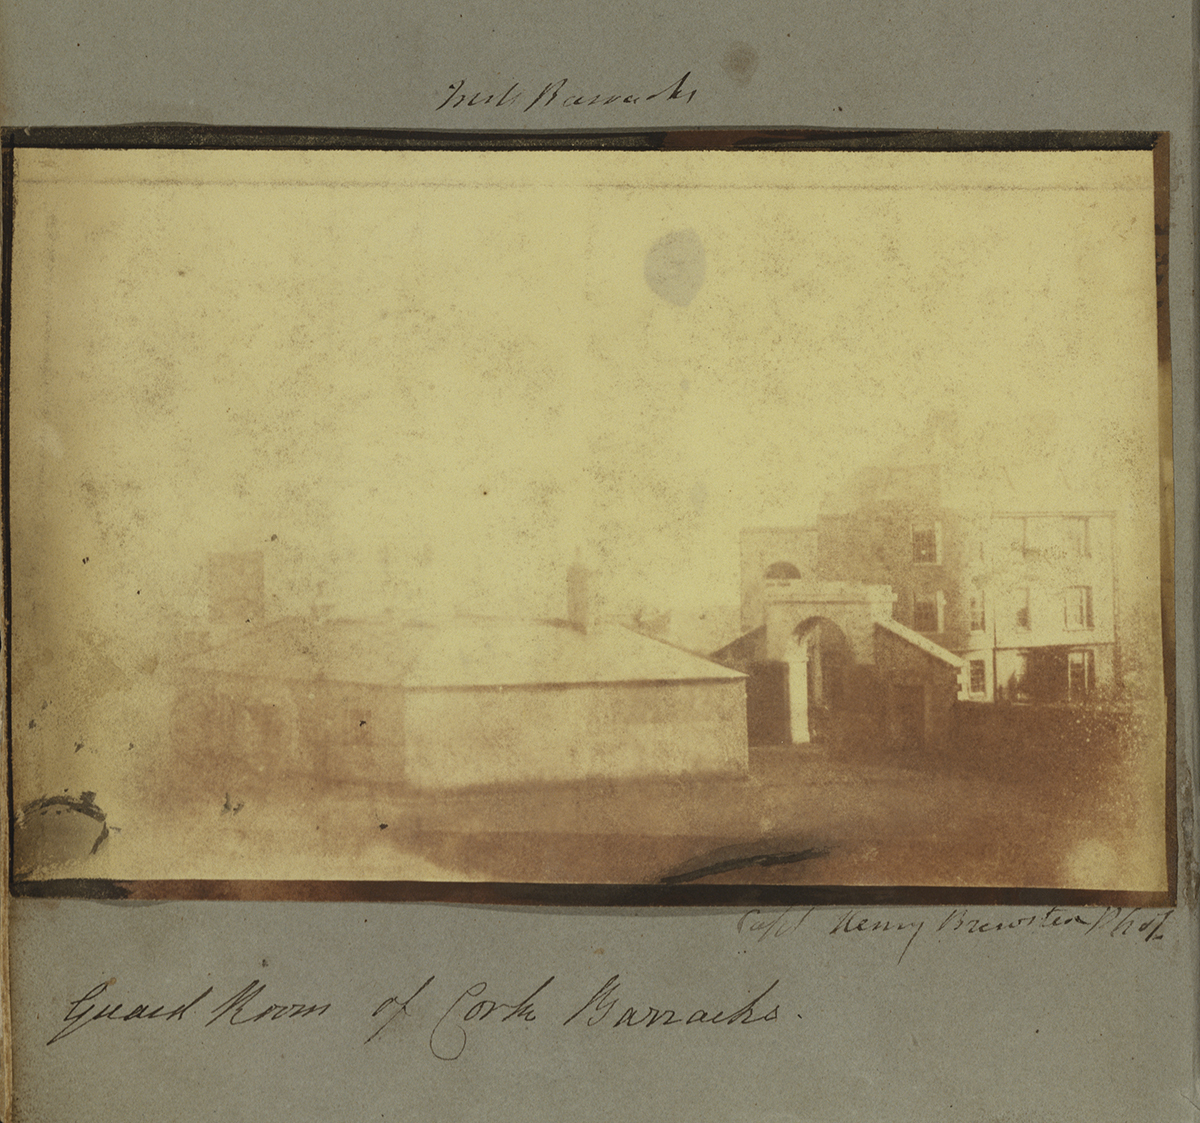 Captain Henry Craigie Brewster’s calotypes from Cork, Fermoy and Buttevant barracks